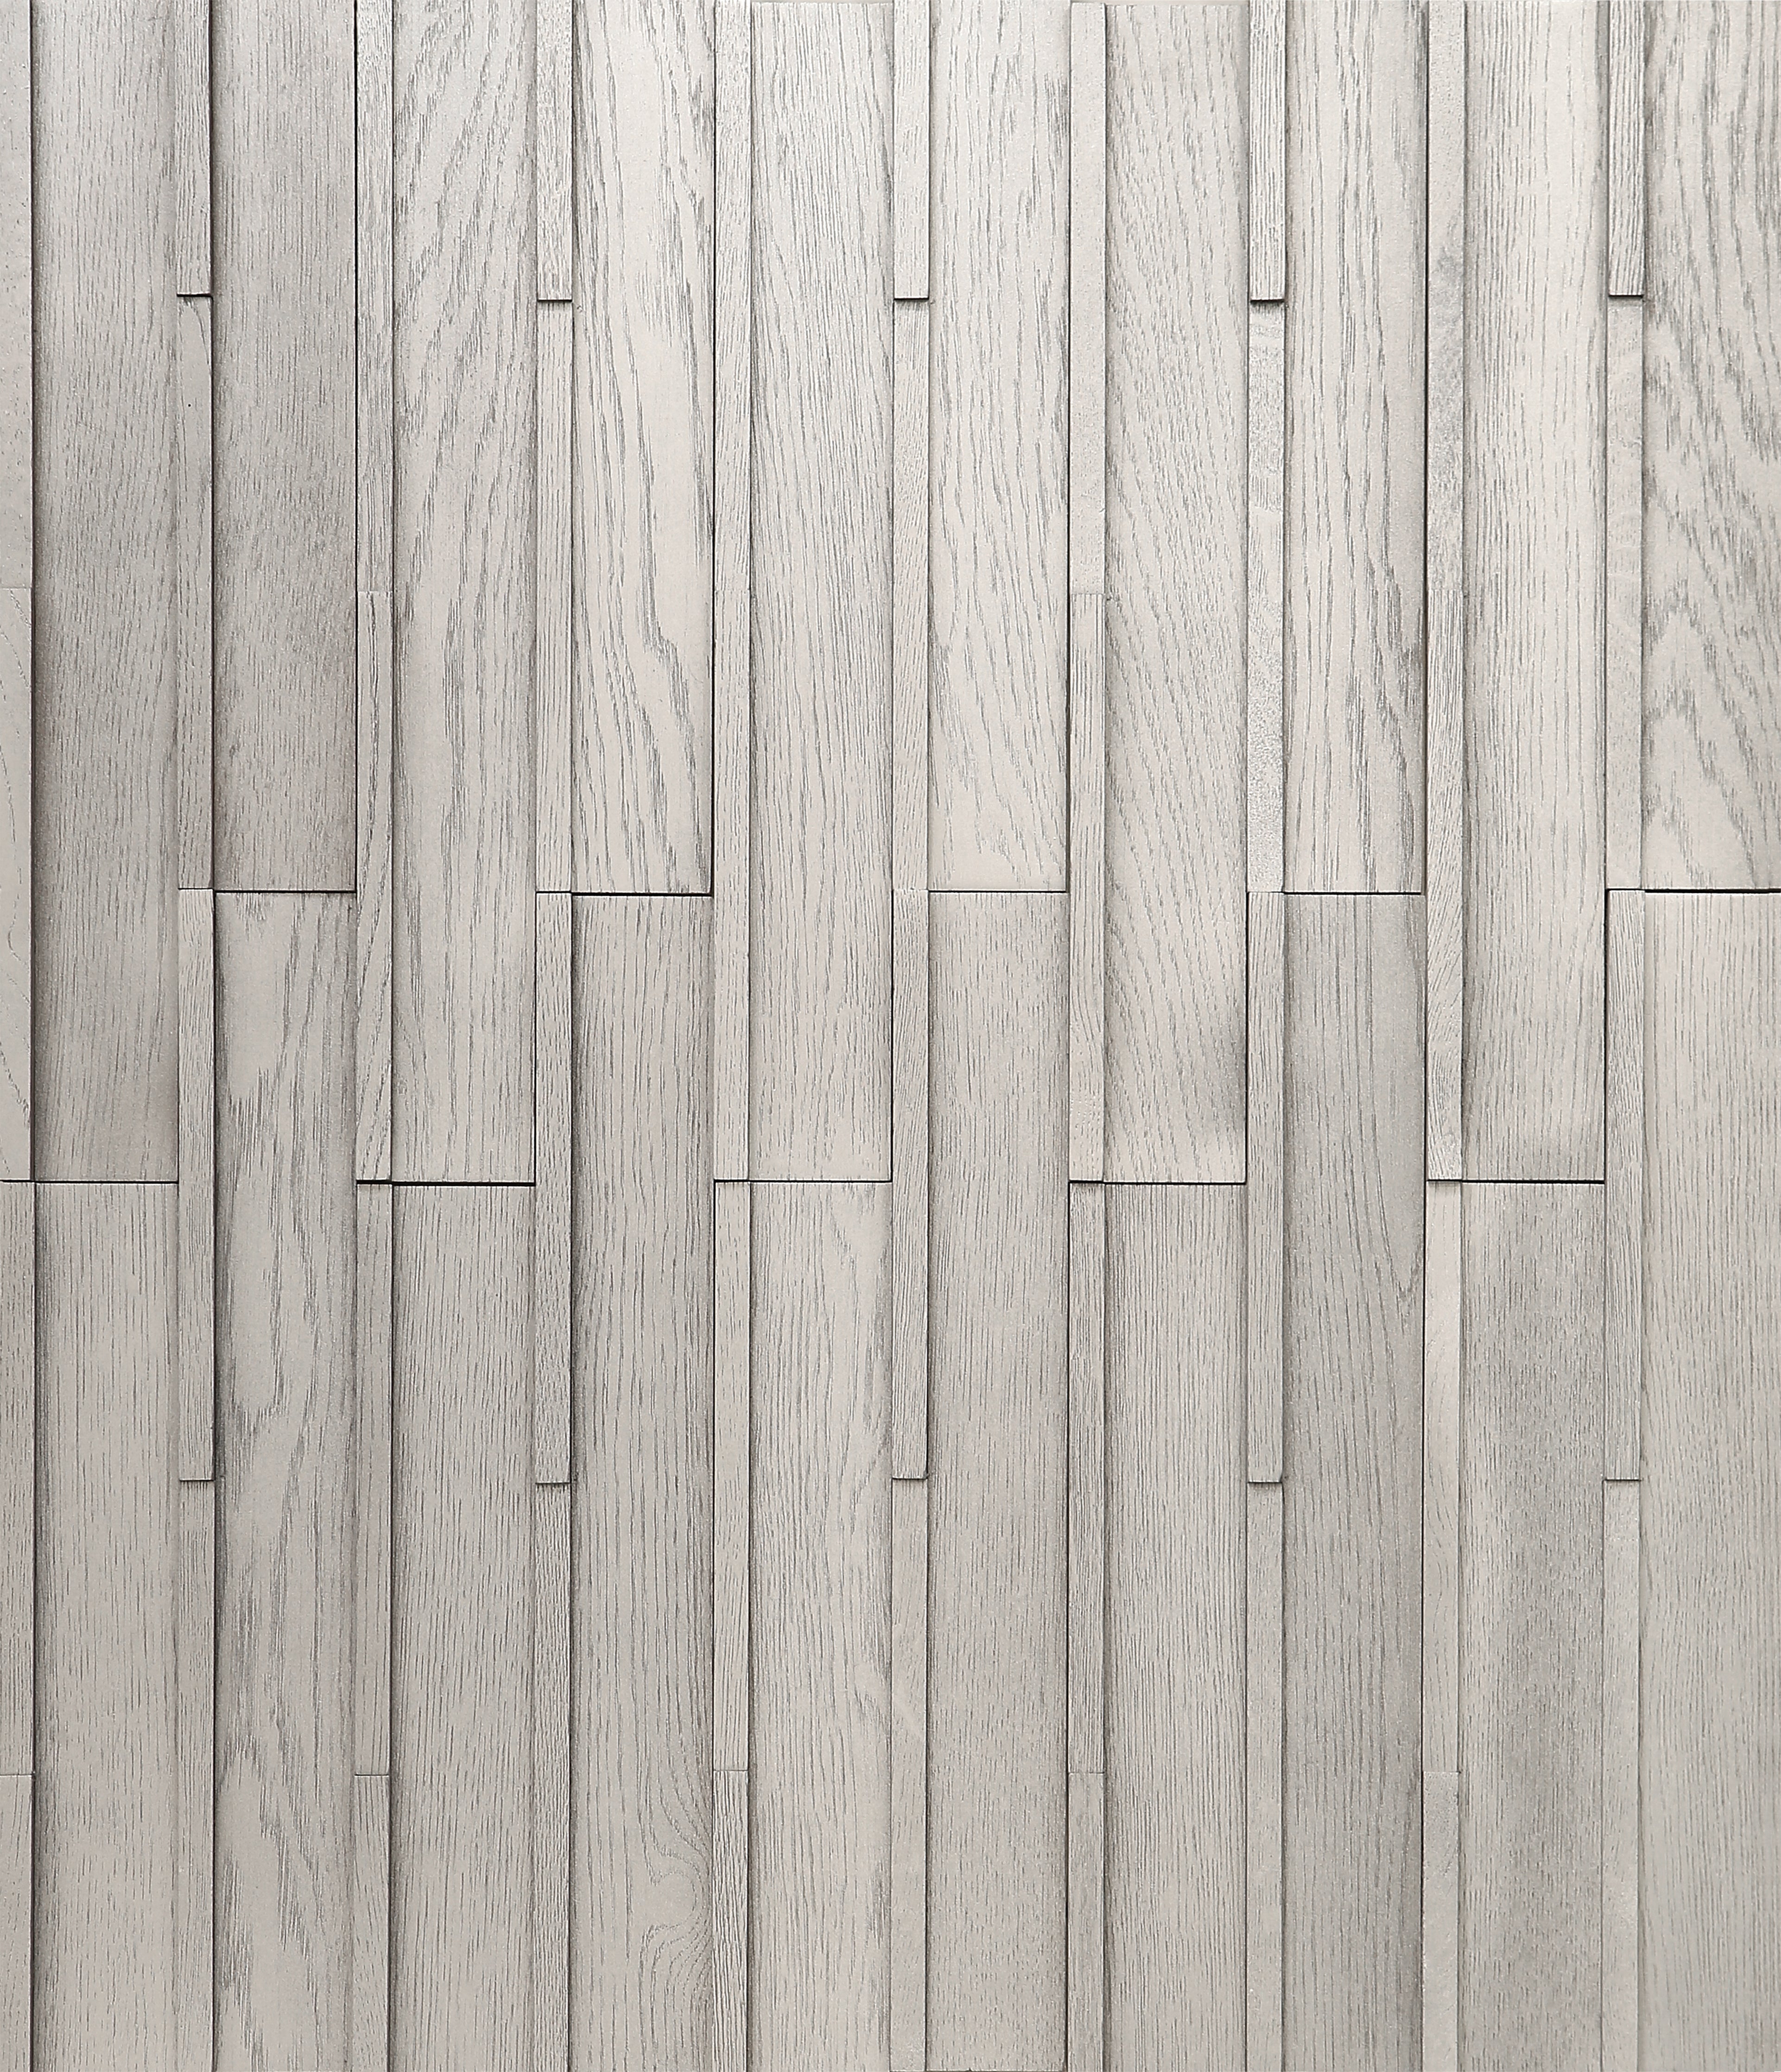 duchateau inceptiv kubik silver oak three dimensional wall natural wood panel lacquer for interior use distributed by surface group international